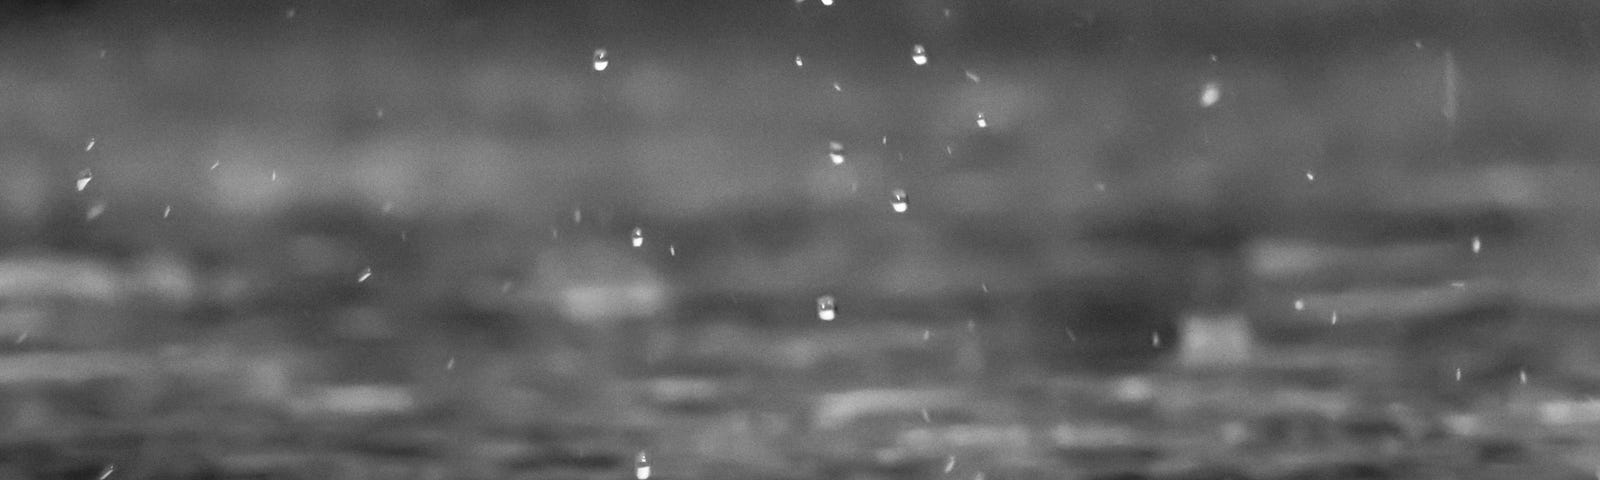 a picture of raindrops falling